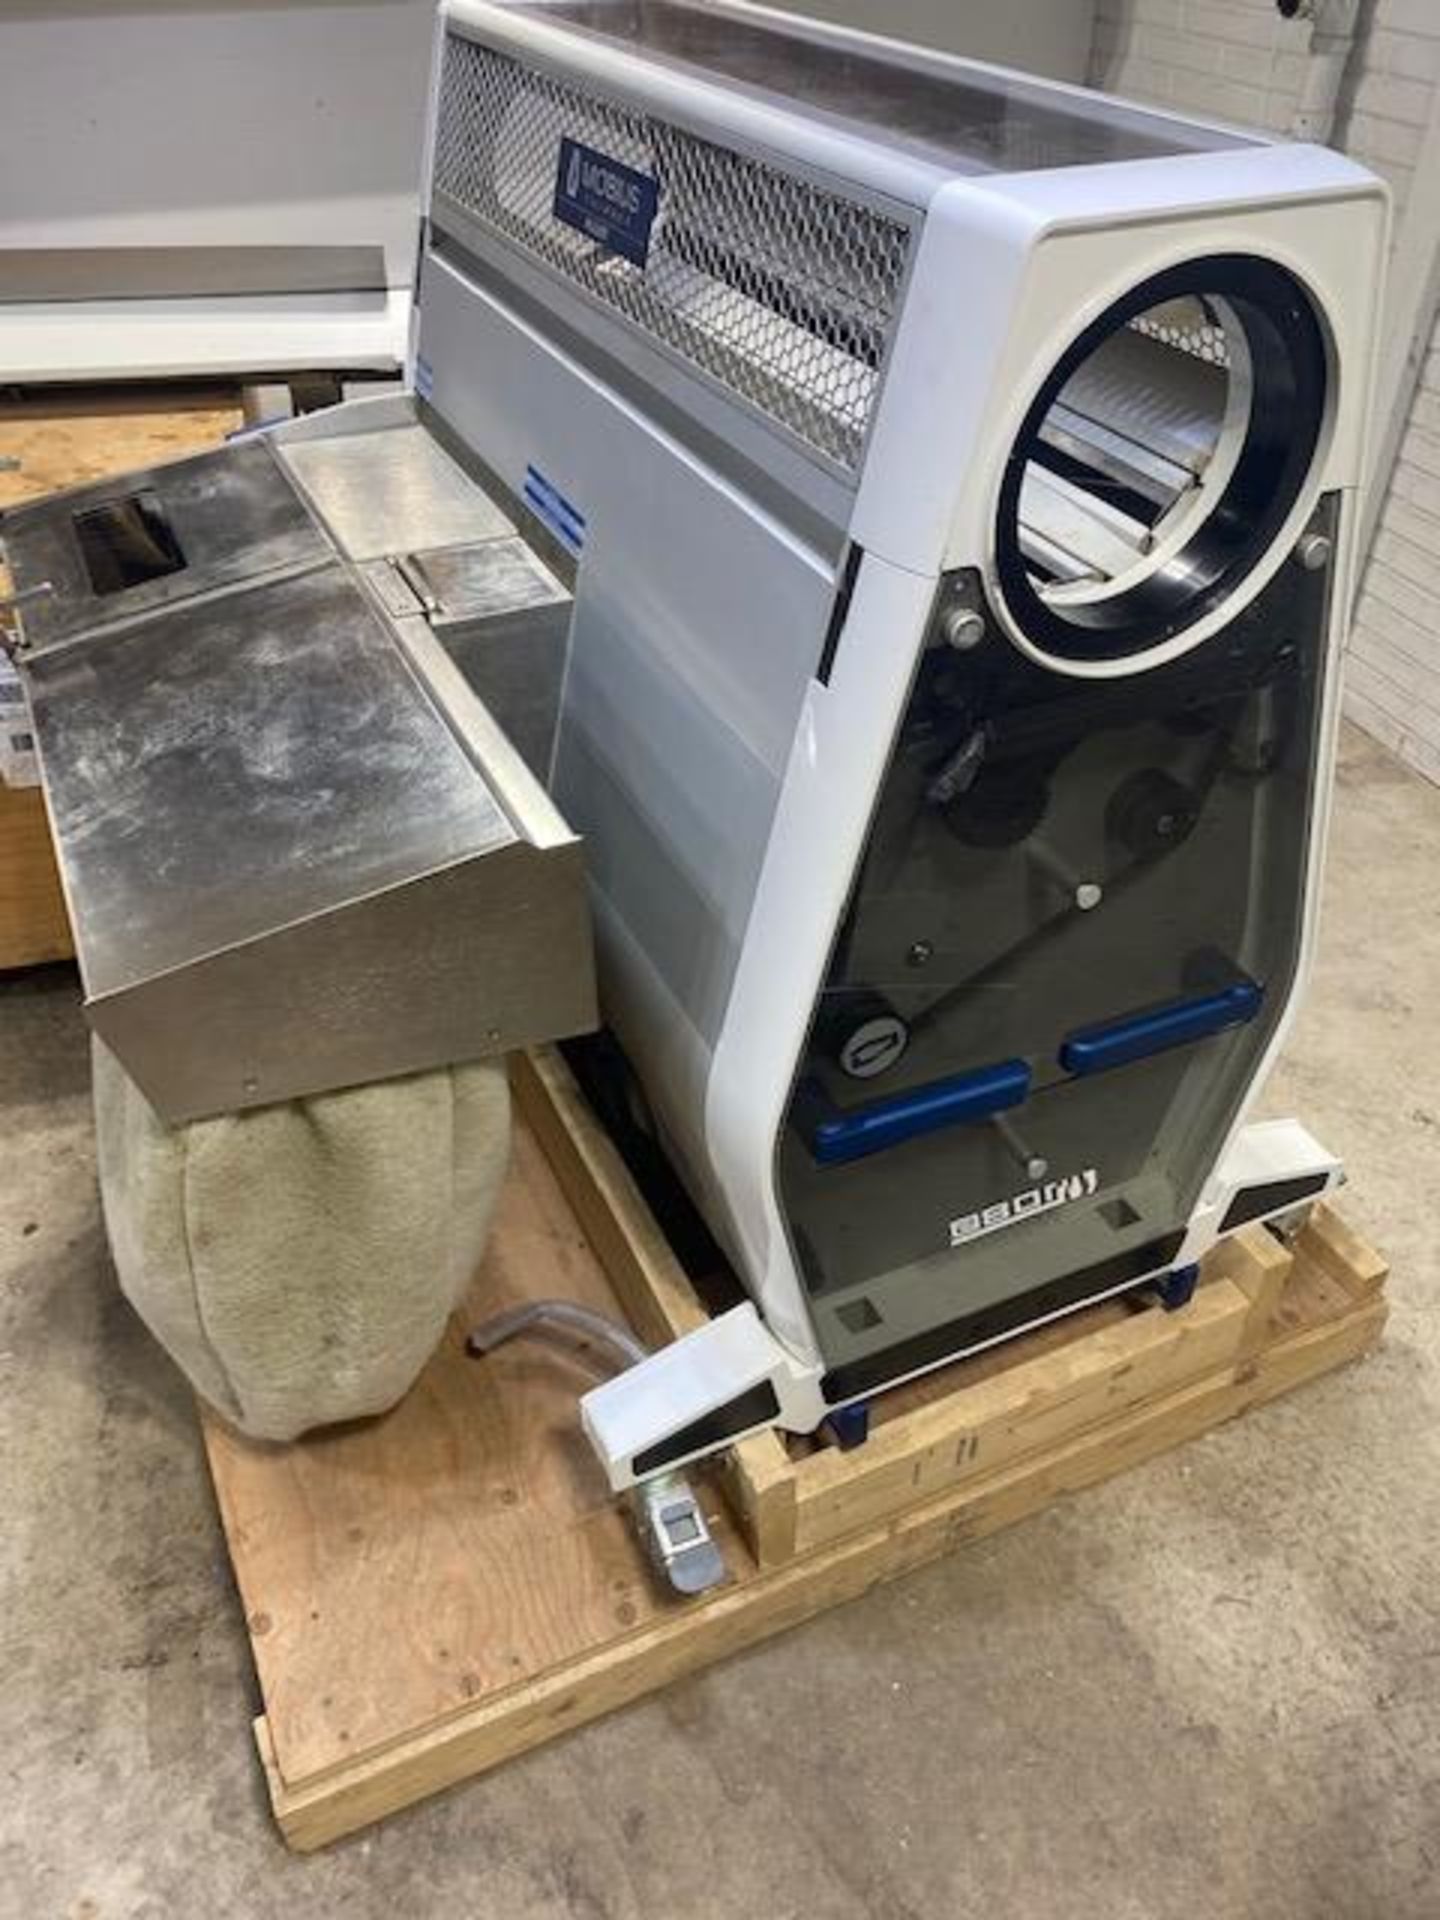 Used Mobius Trimmers Set Up w/ (2) Mobius Trimmers. Model M108S, Conveyors, & Hot Swap Kit